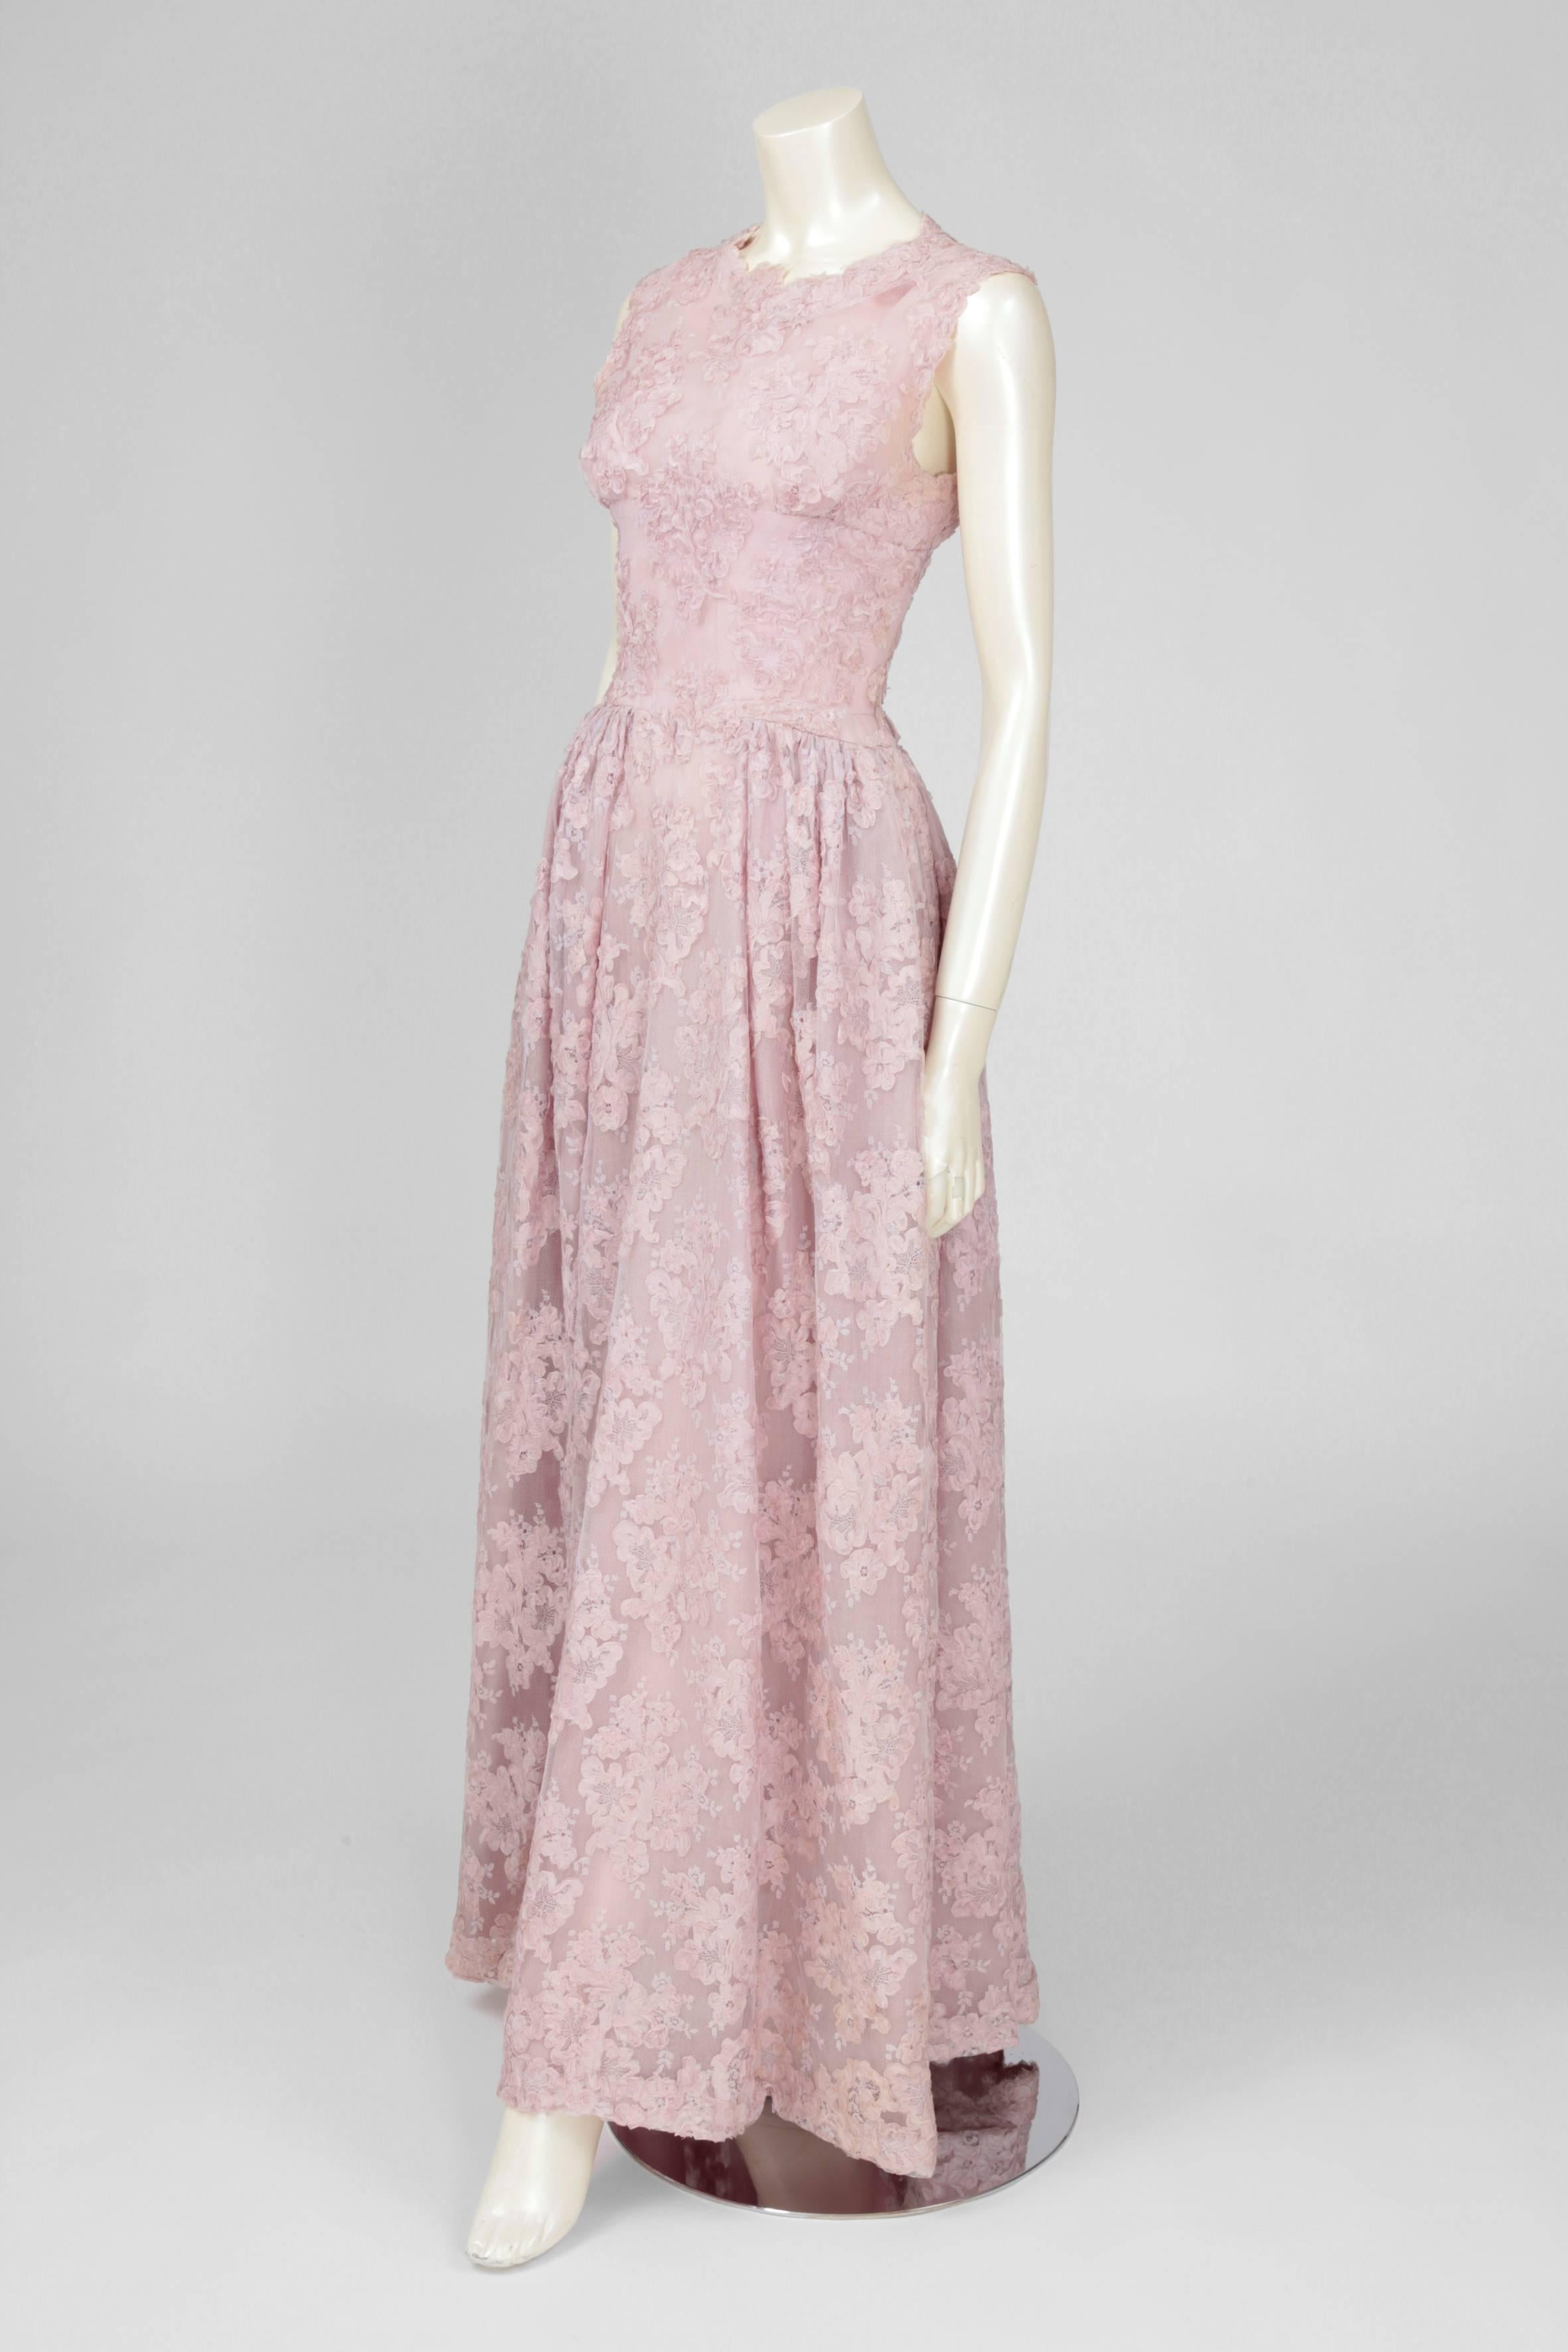 This wonderful handmade late 50’s - early 60’s gown has been crafted from delicate pinkish light lilac lace with matching organdy lining. The sleeveless dress features a round neckline with scalloped edges enhancing in this way the feminity of this